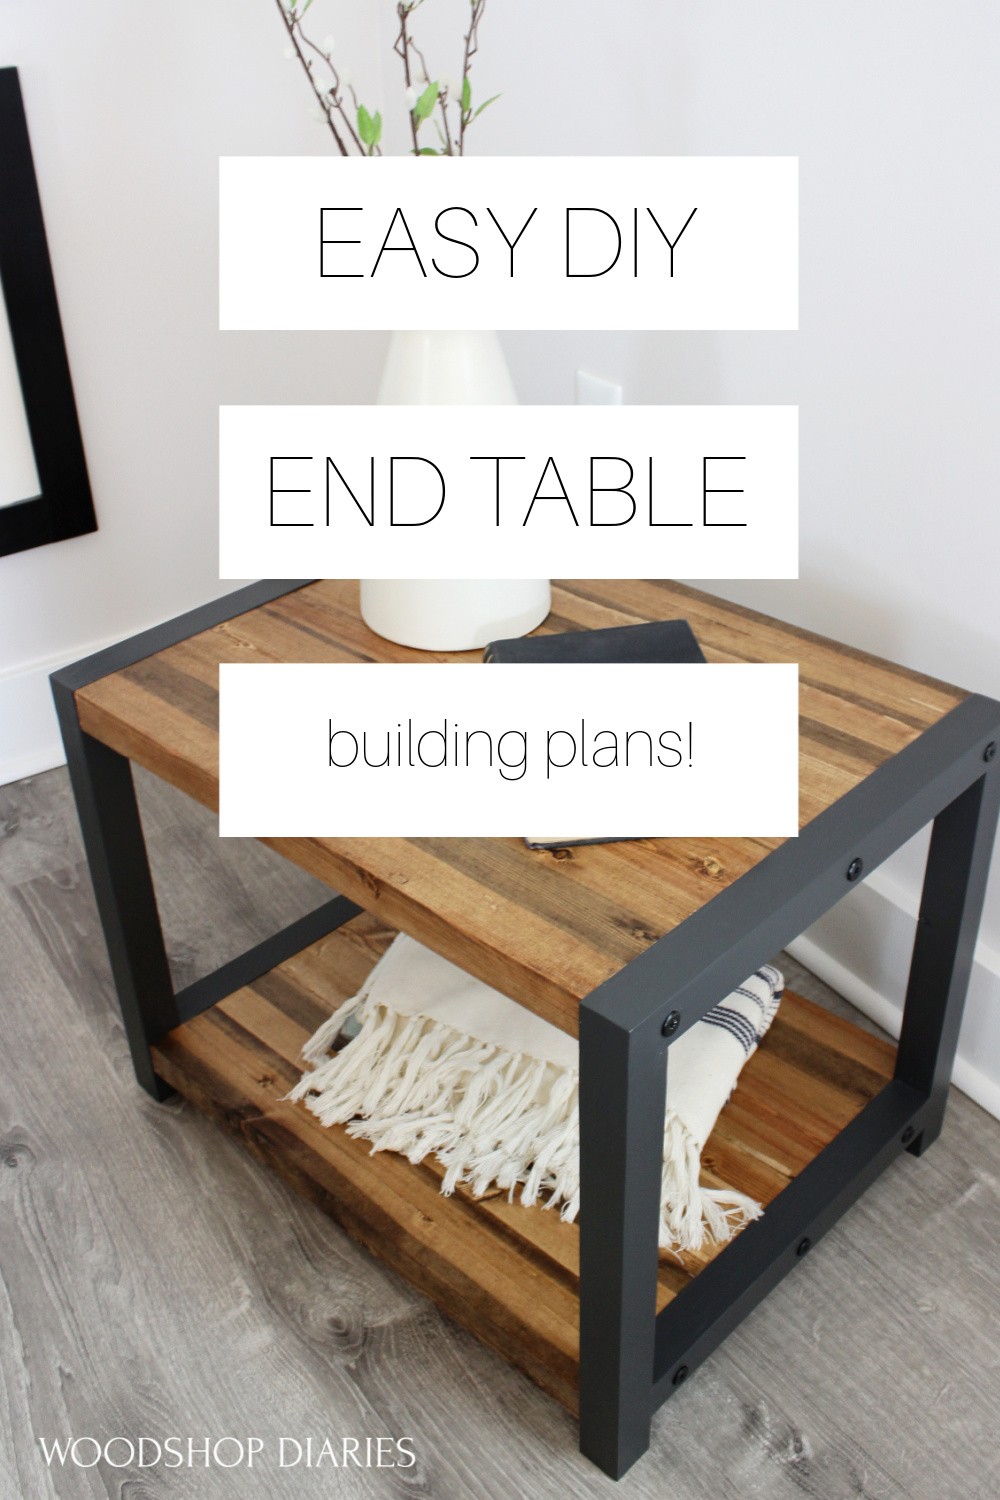 Pinterest graphic showing DIY modern industrial end table with white boxes over laid with text " Easy DIY end table building plans"